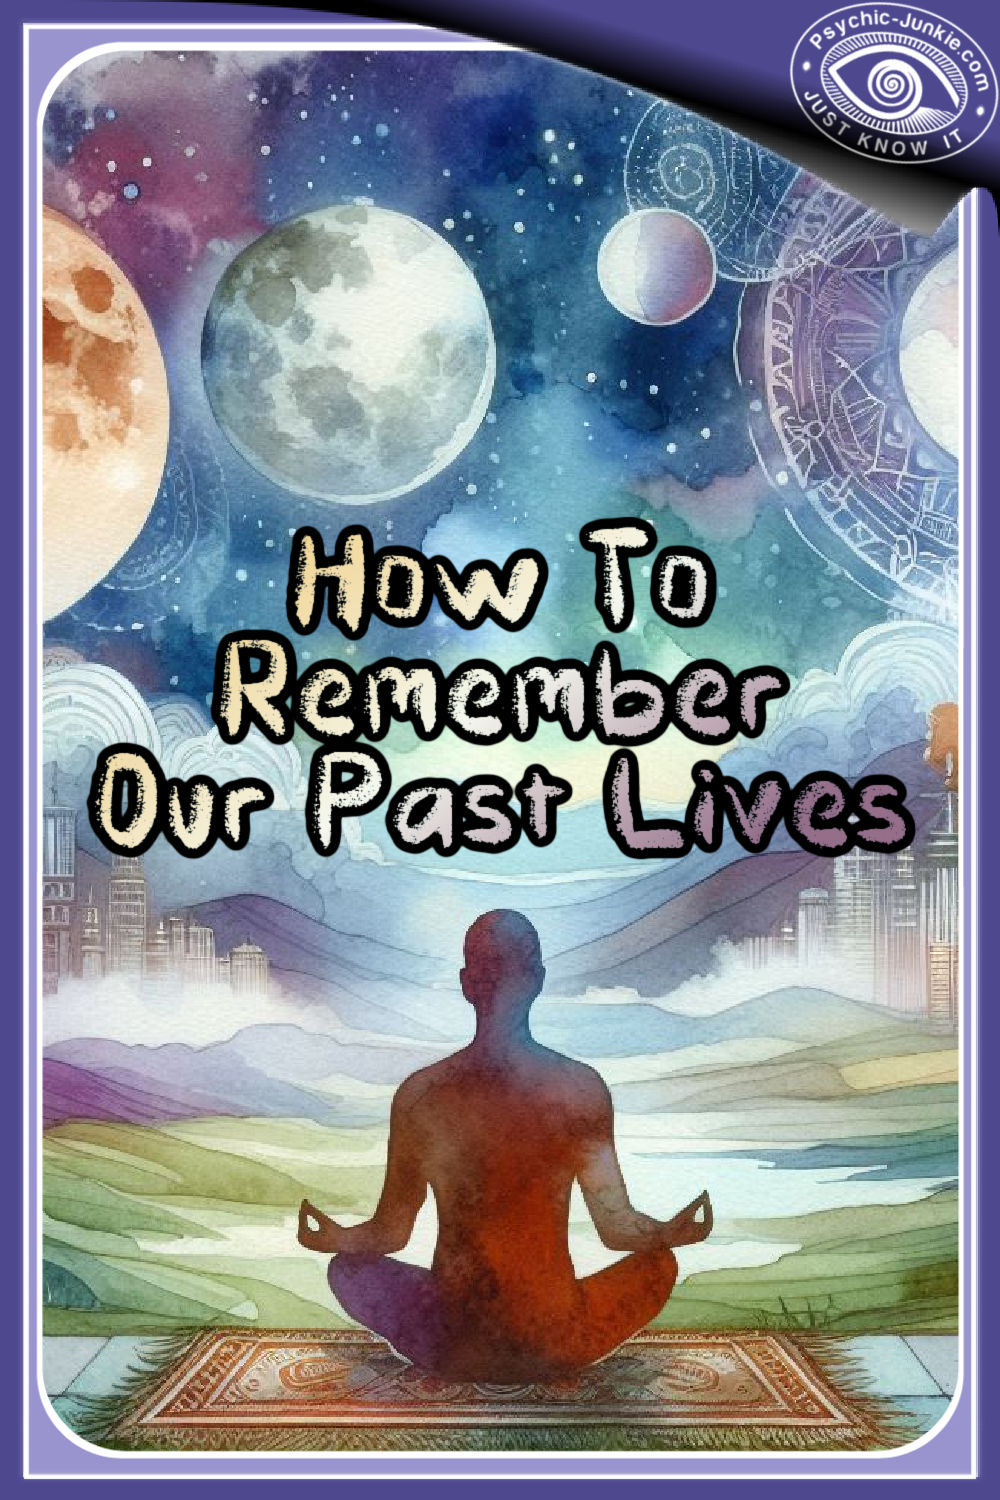 How Can We Remember Our Past Lives?